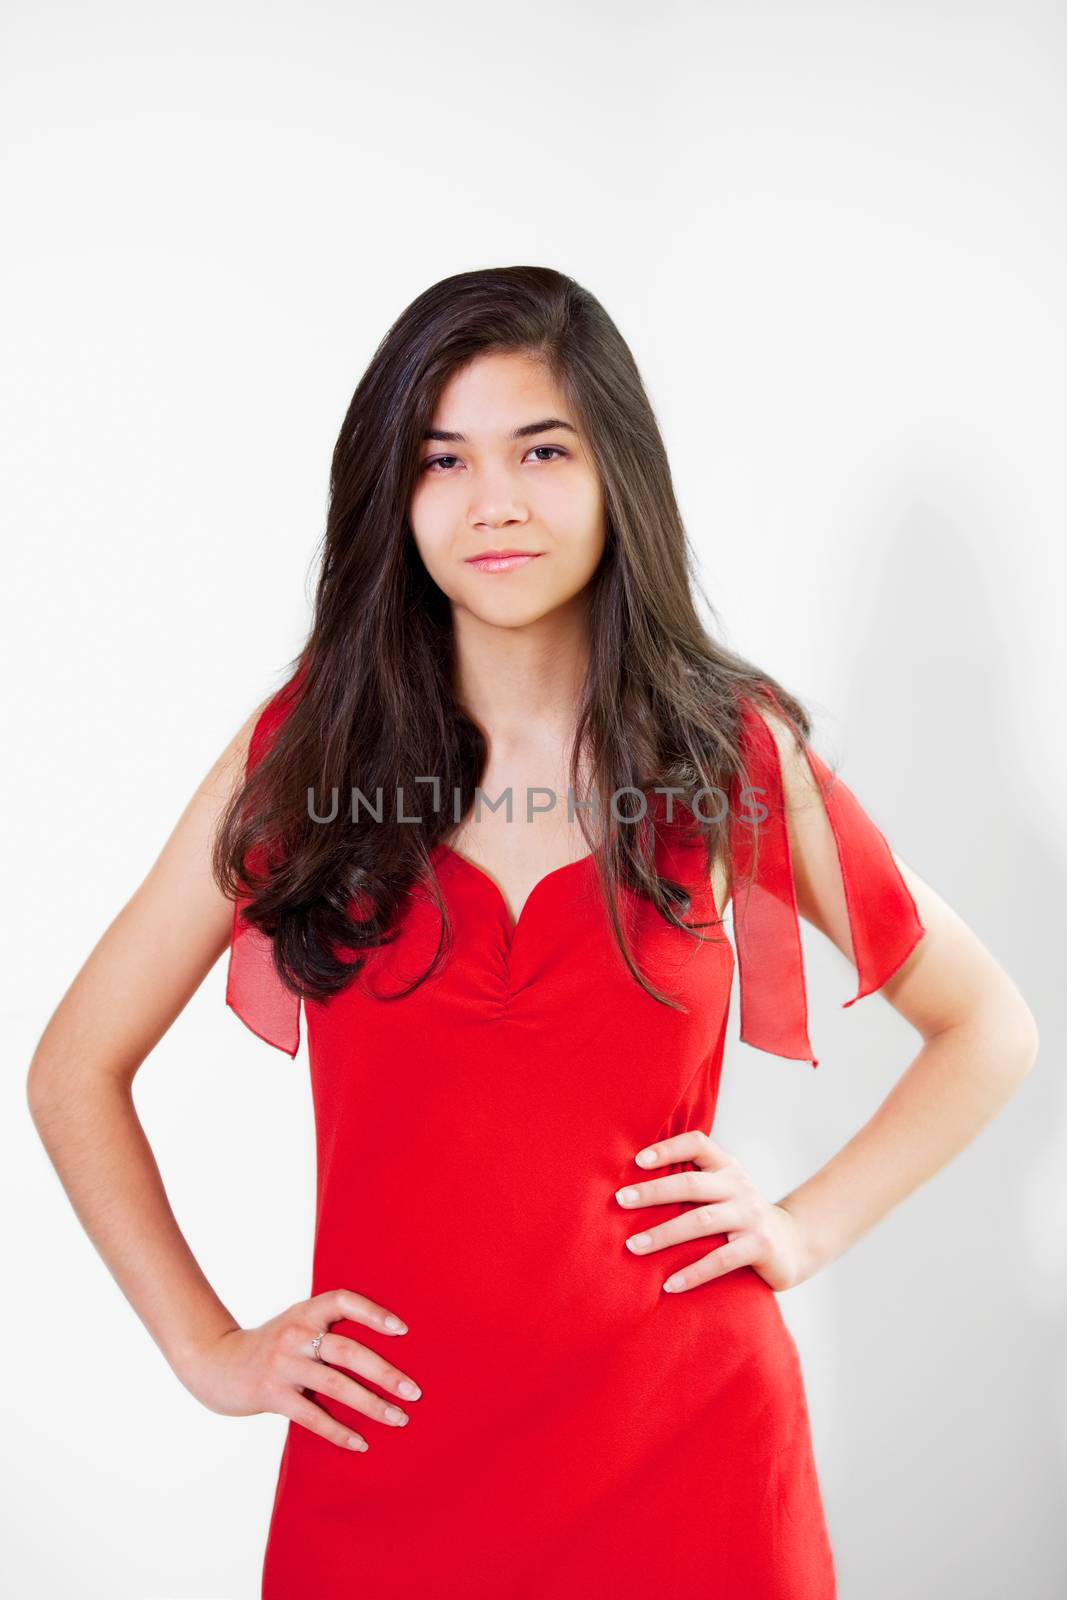 Beautiful biracial teen girl in elegant red dress, hands on hips, relaxed